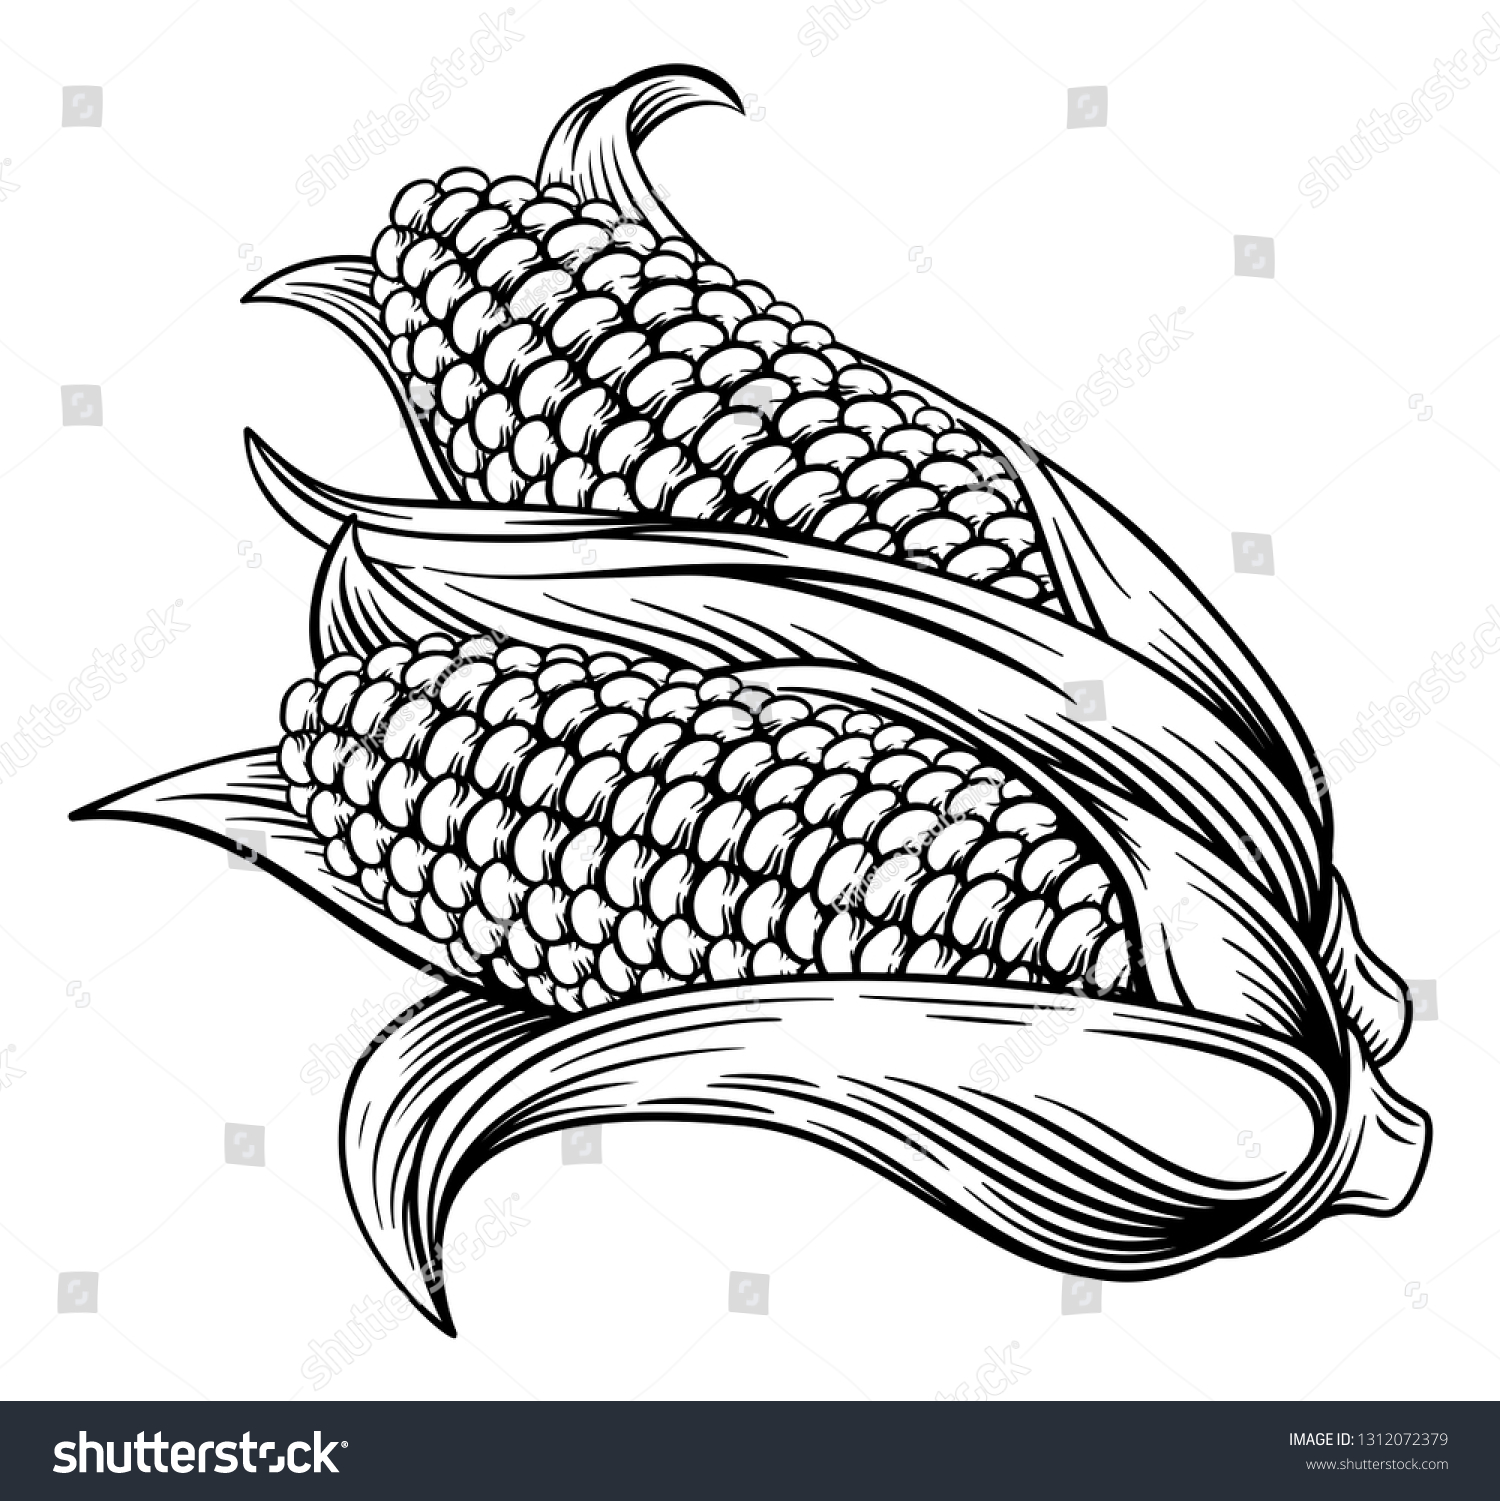 A sweet corn ear maize woodcut print or etching vintage style illustration #1312072379